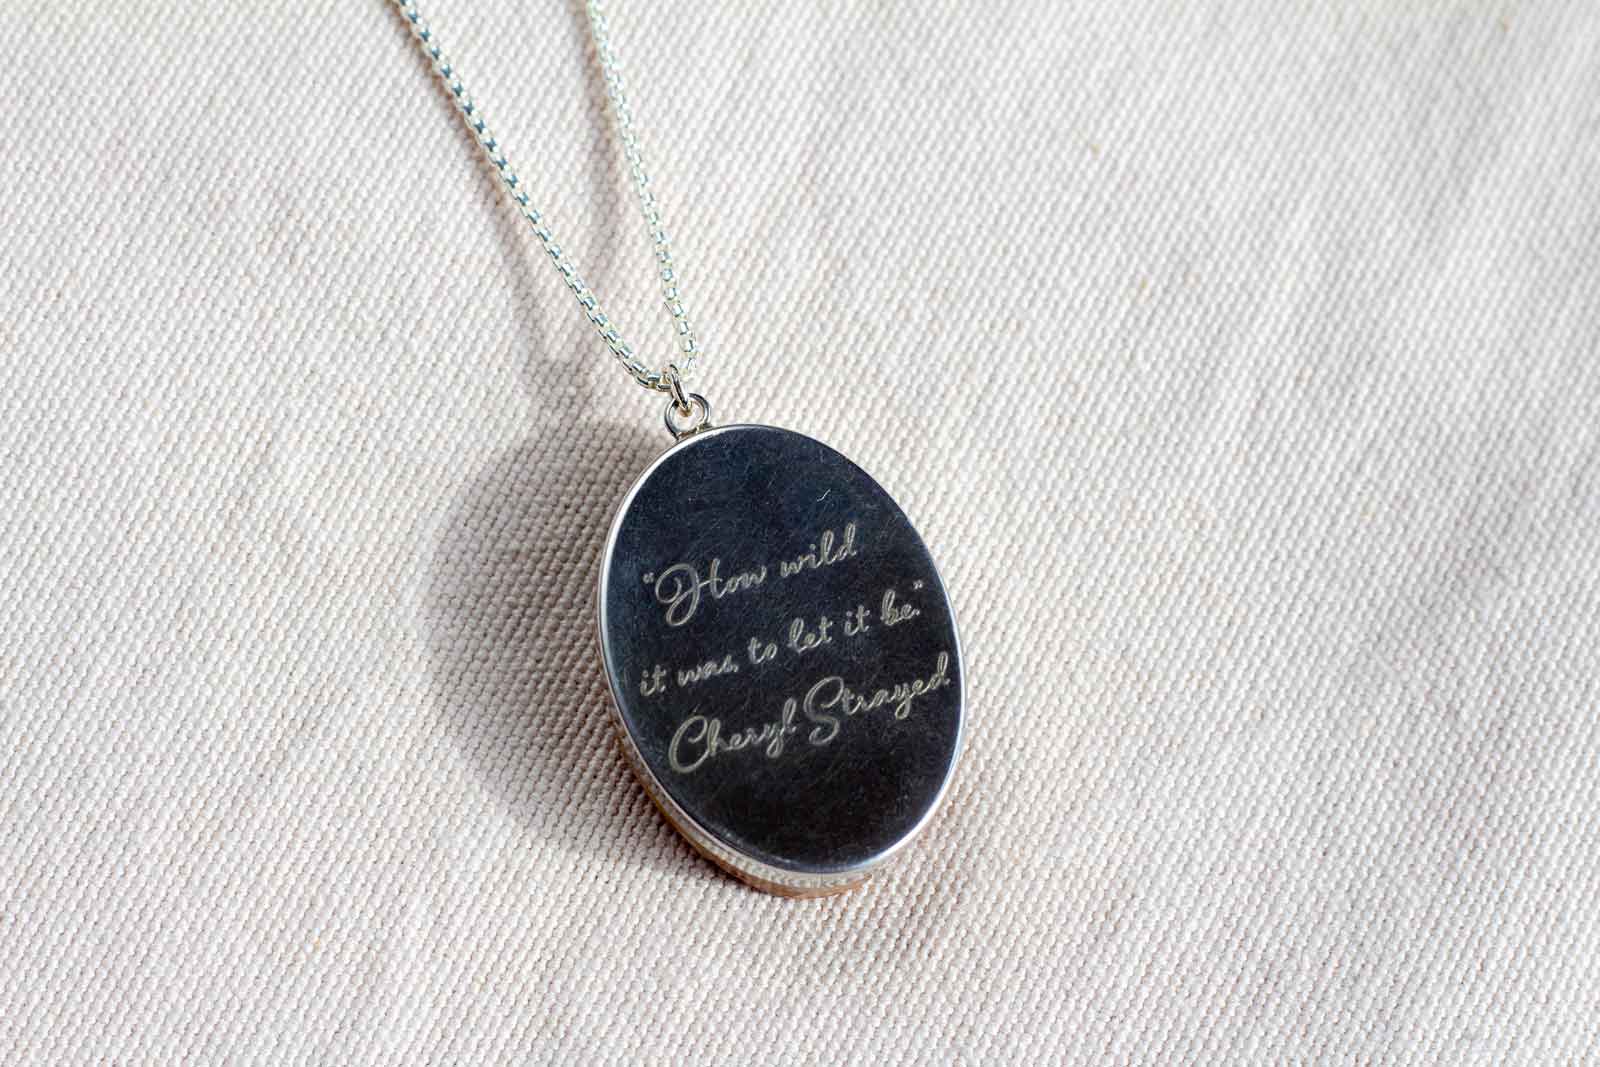 A quote engraved on a sterling silver necklace reads, "How wild it was to let it be" by Cheryl Strayed